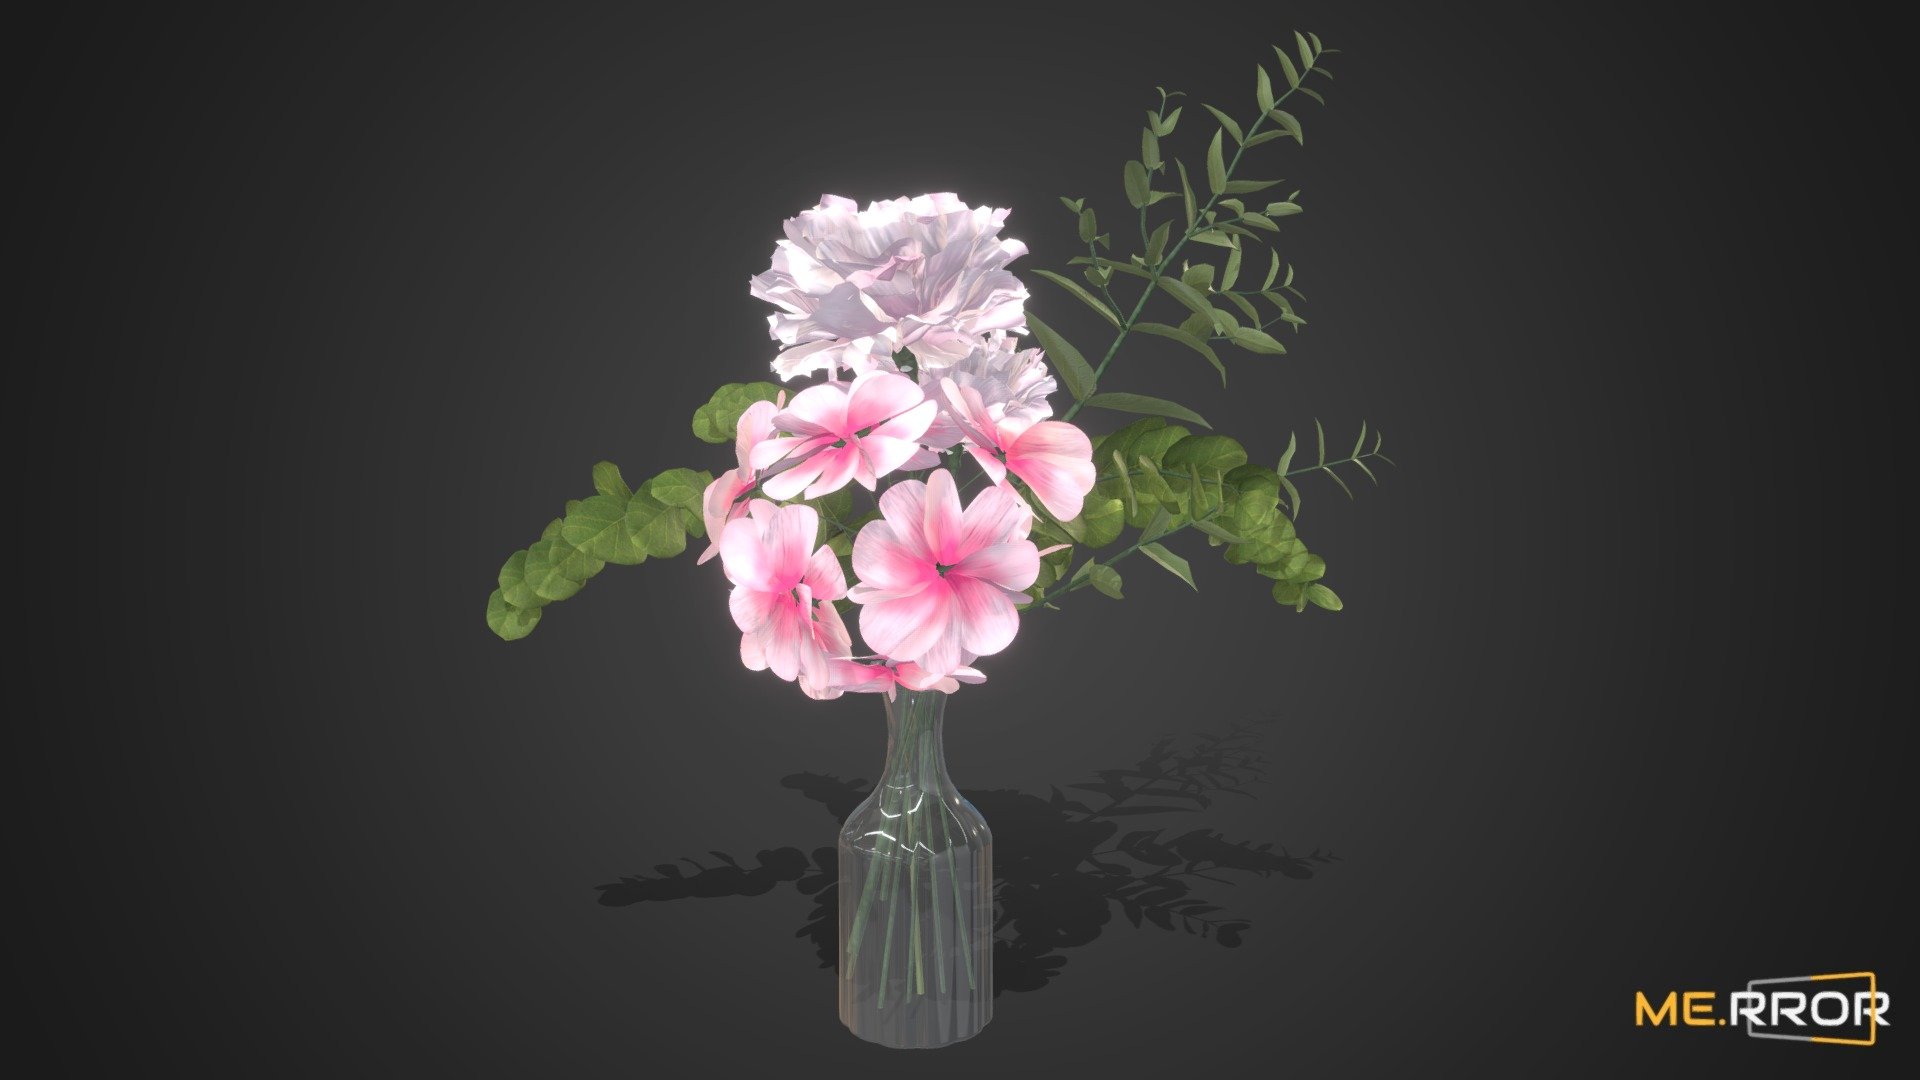 MERROR is a 3D Content PLATFORM which introduces various Asian assets to the 3D world


3DScanning #Photogrametry #ME.RROR - [Game-Ready] Pink Flowers and Vases - Buy Royalty Free 3D model by ME.RROR Studio (@merror) 3d model